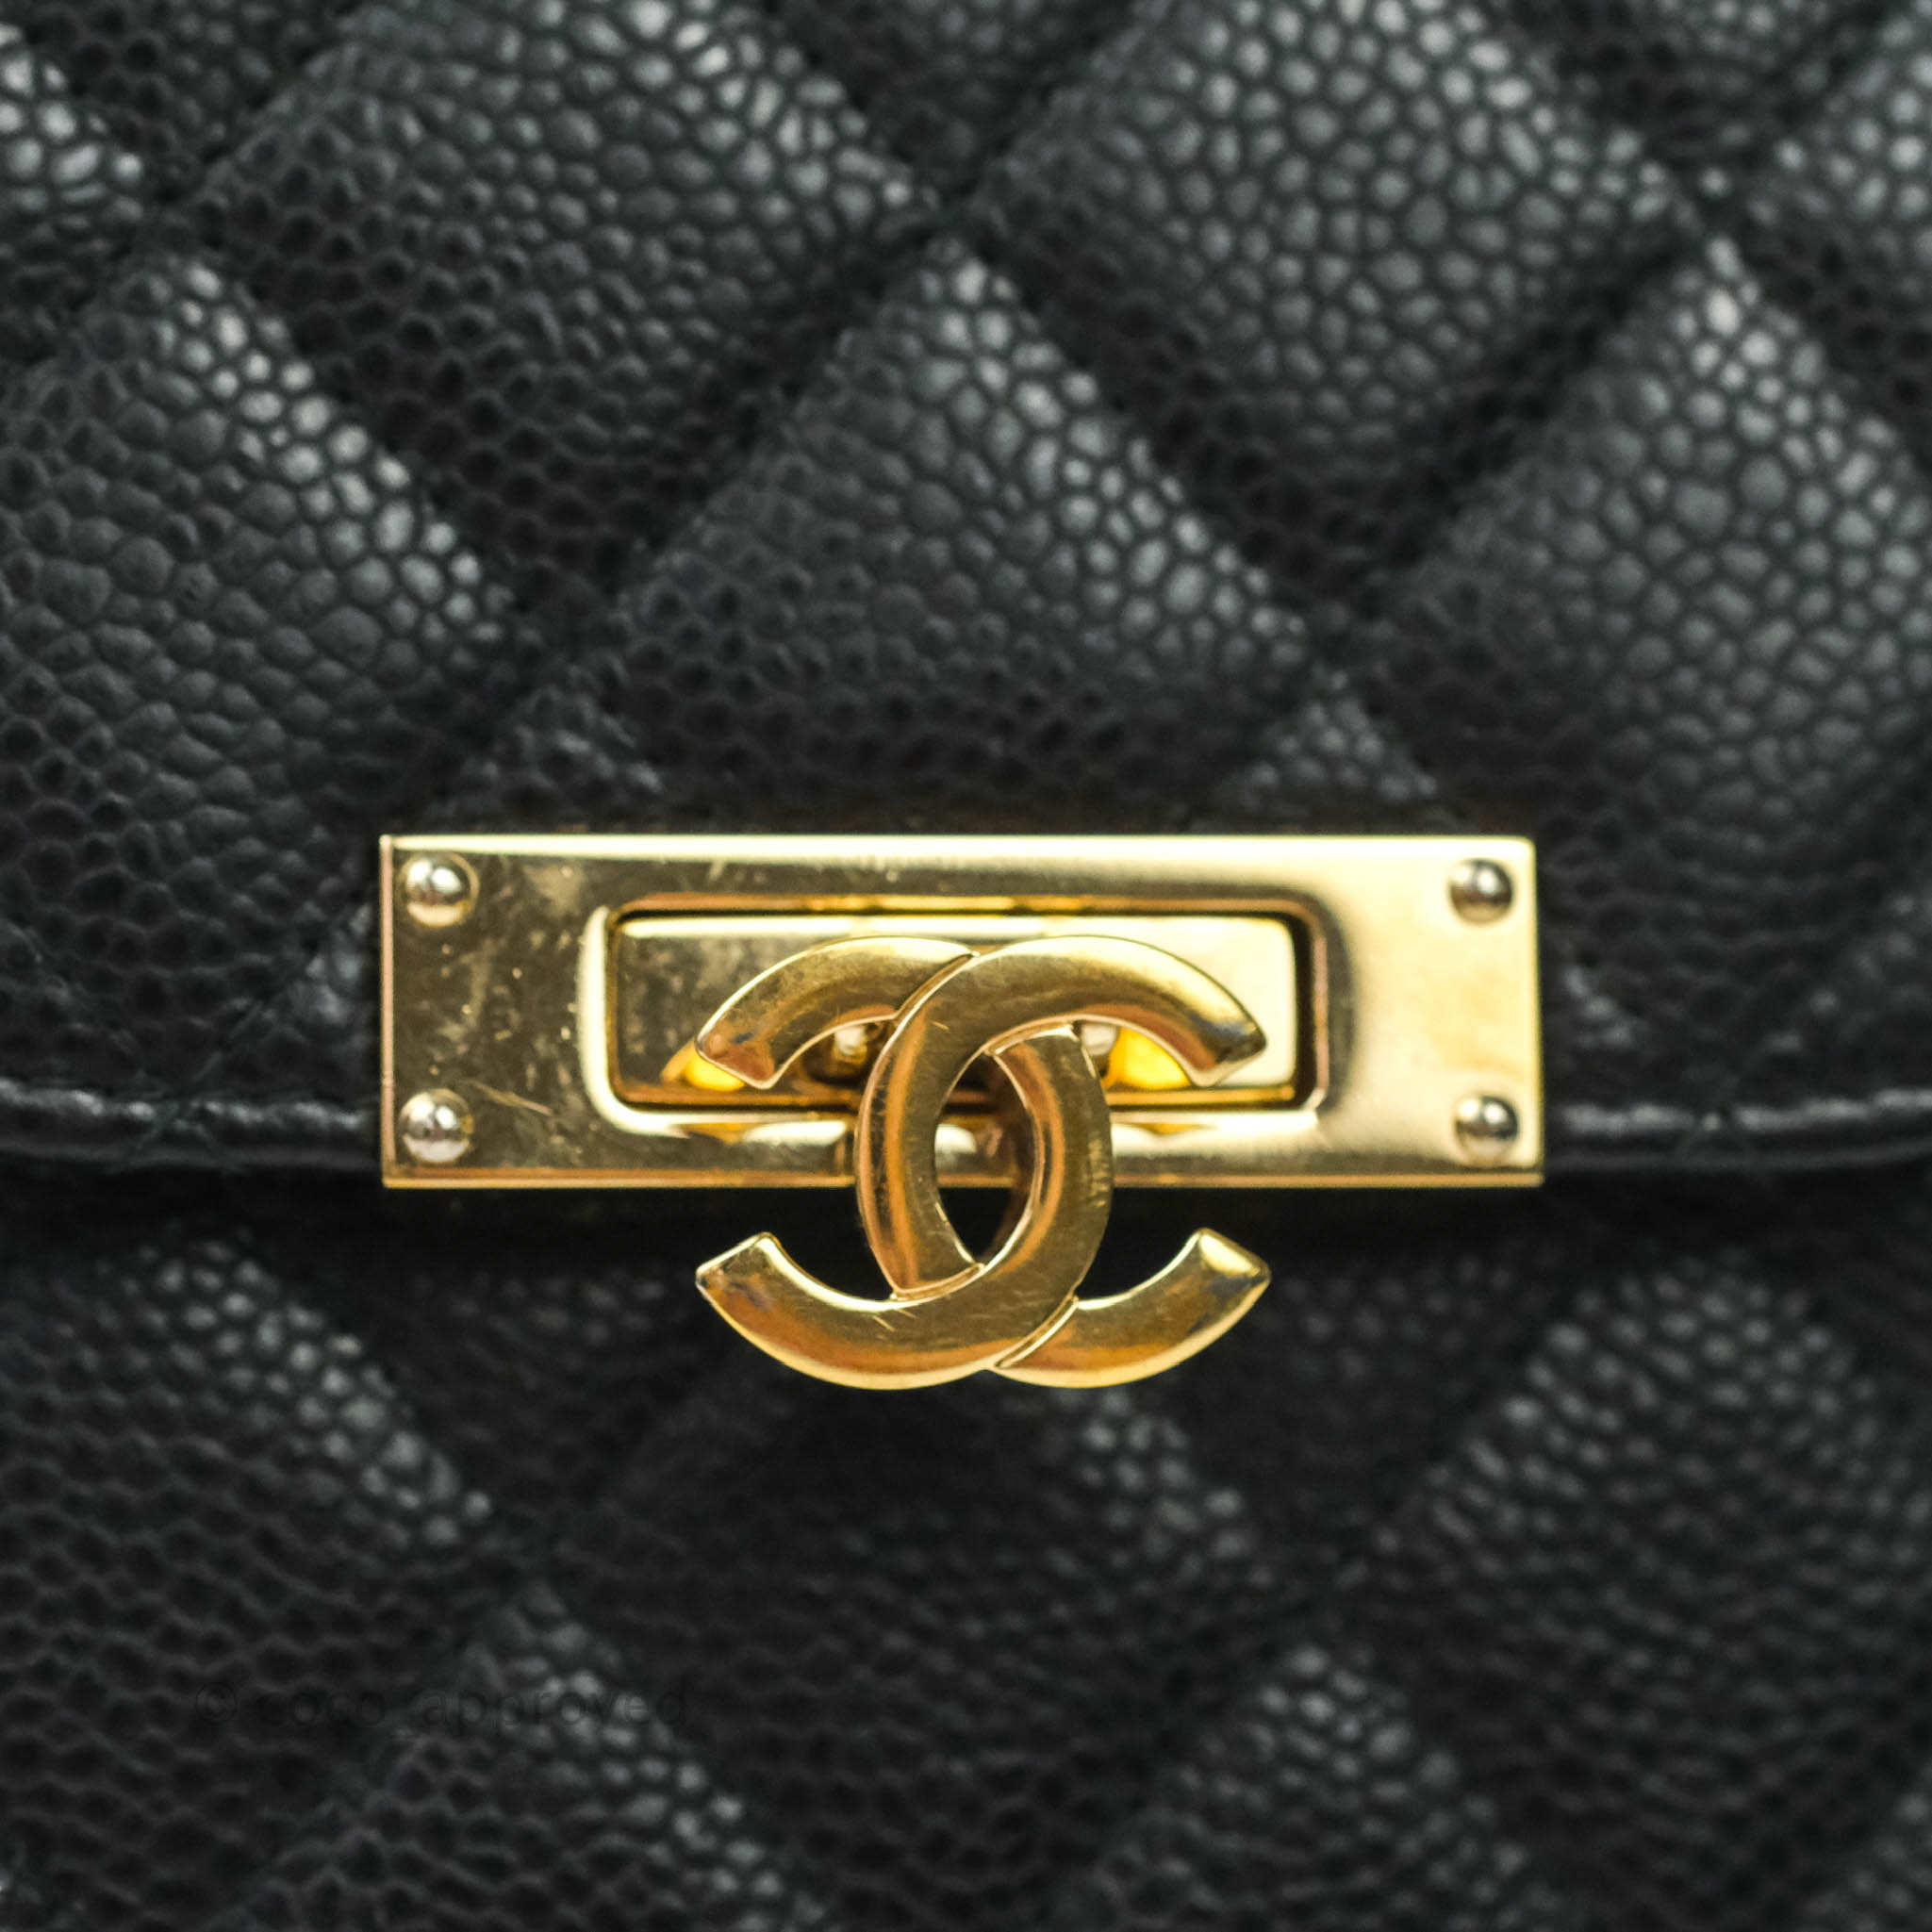 Chanel Quilted iPhone X Phone Case Black Caviar Gold Hardware – Coco  Approved Studio